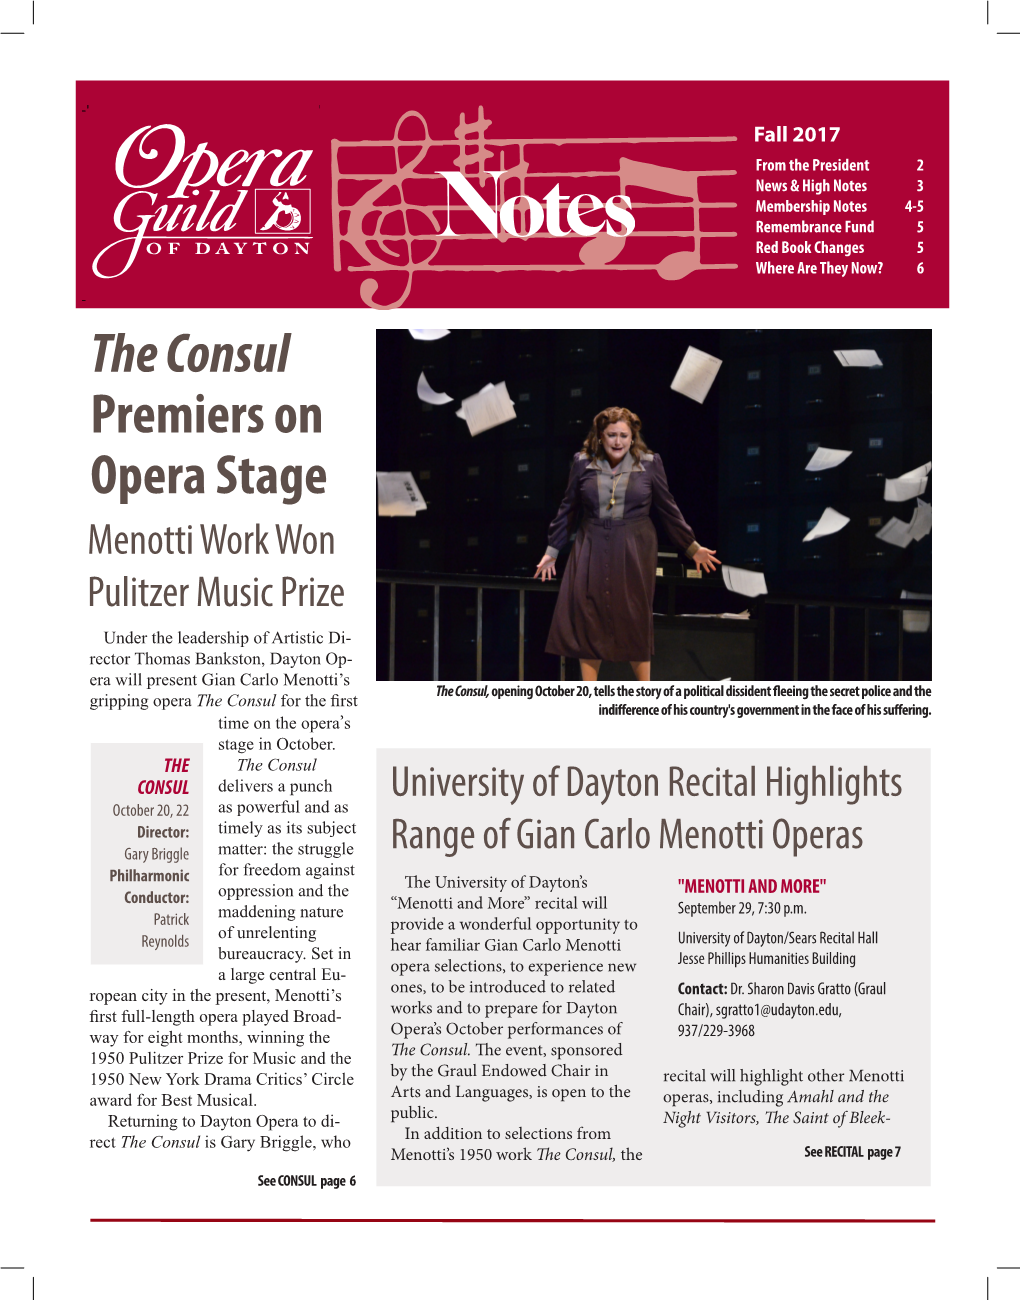 The Consul Premiers on Opera Stage